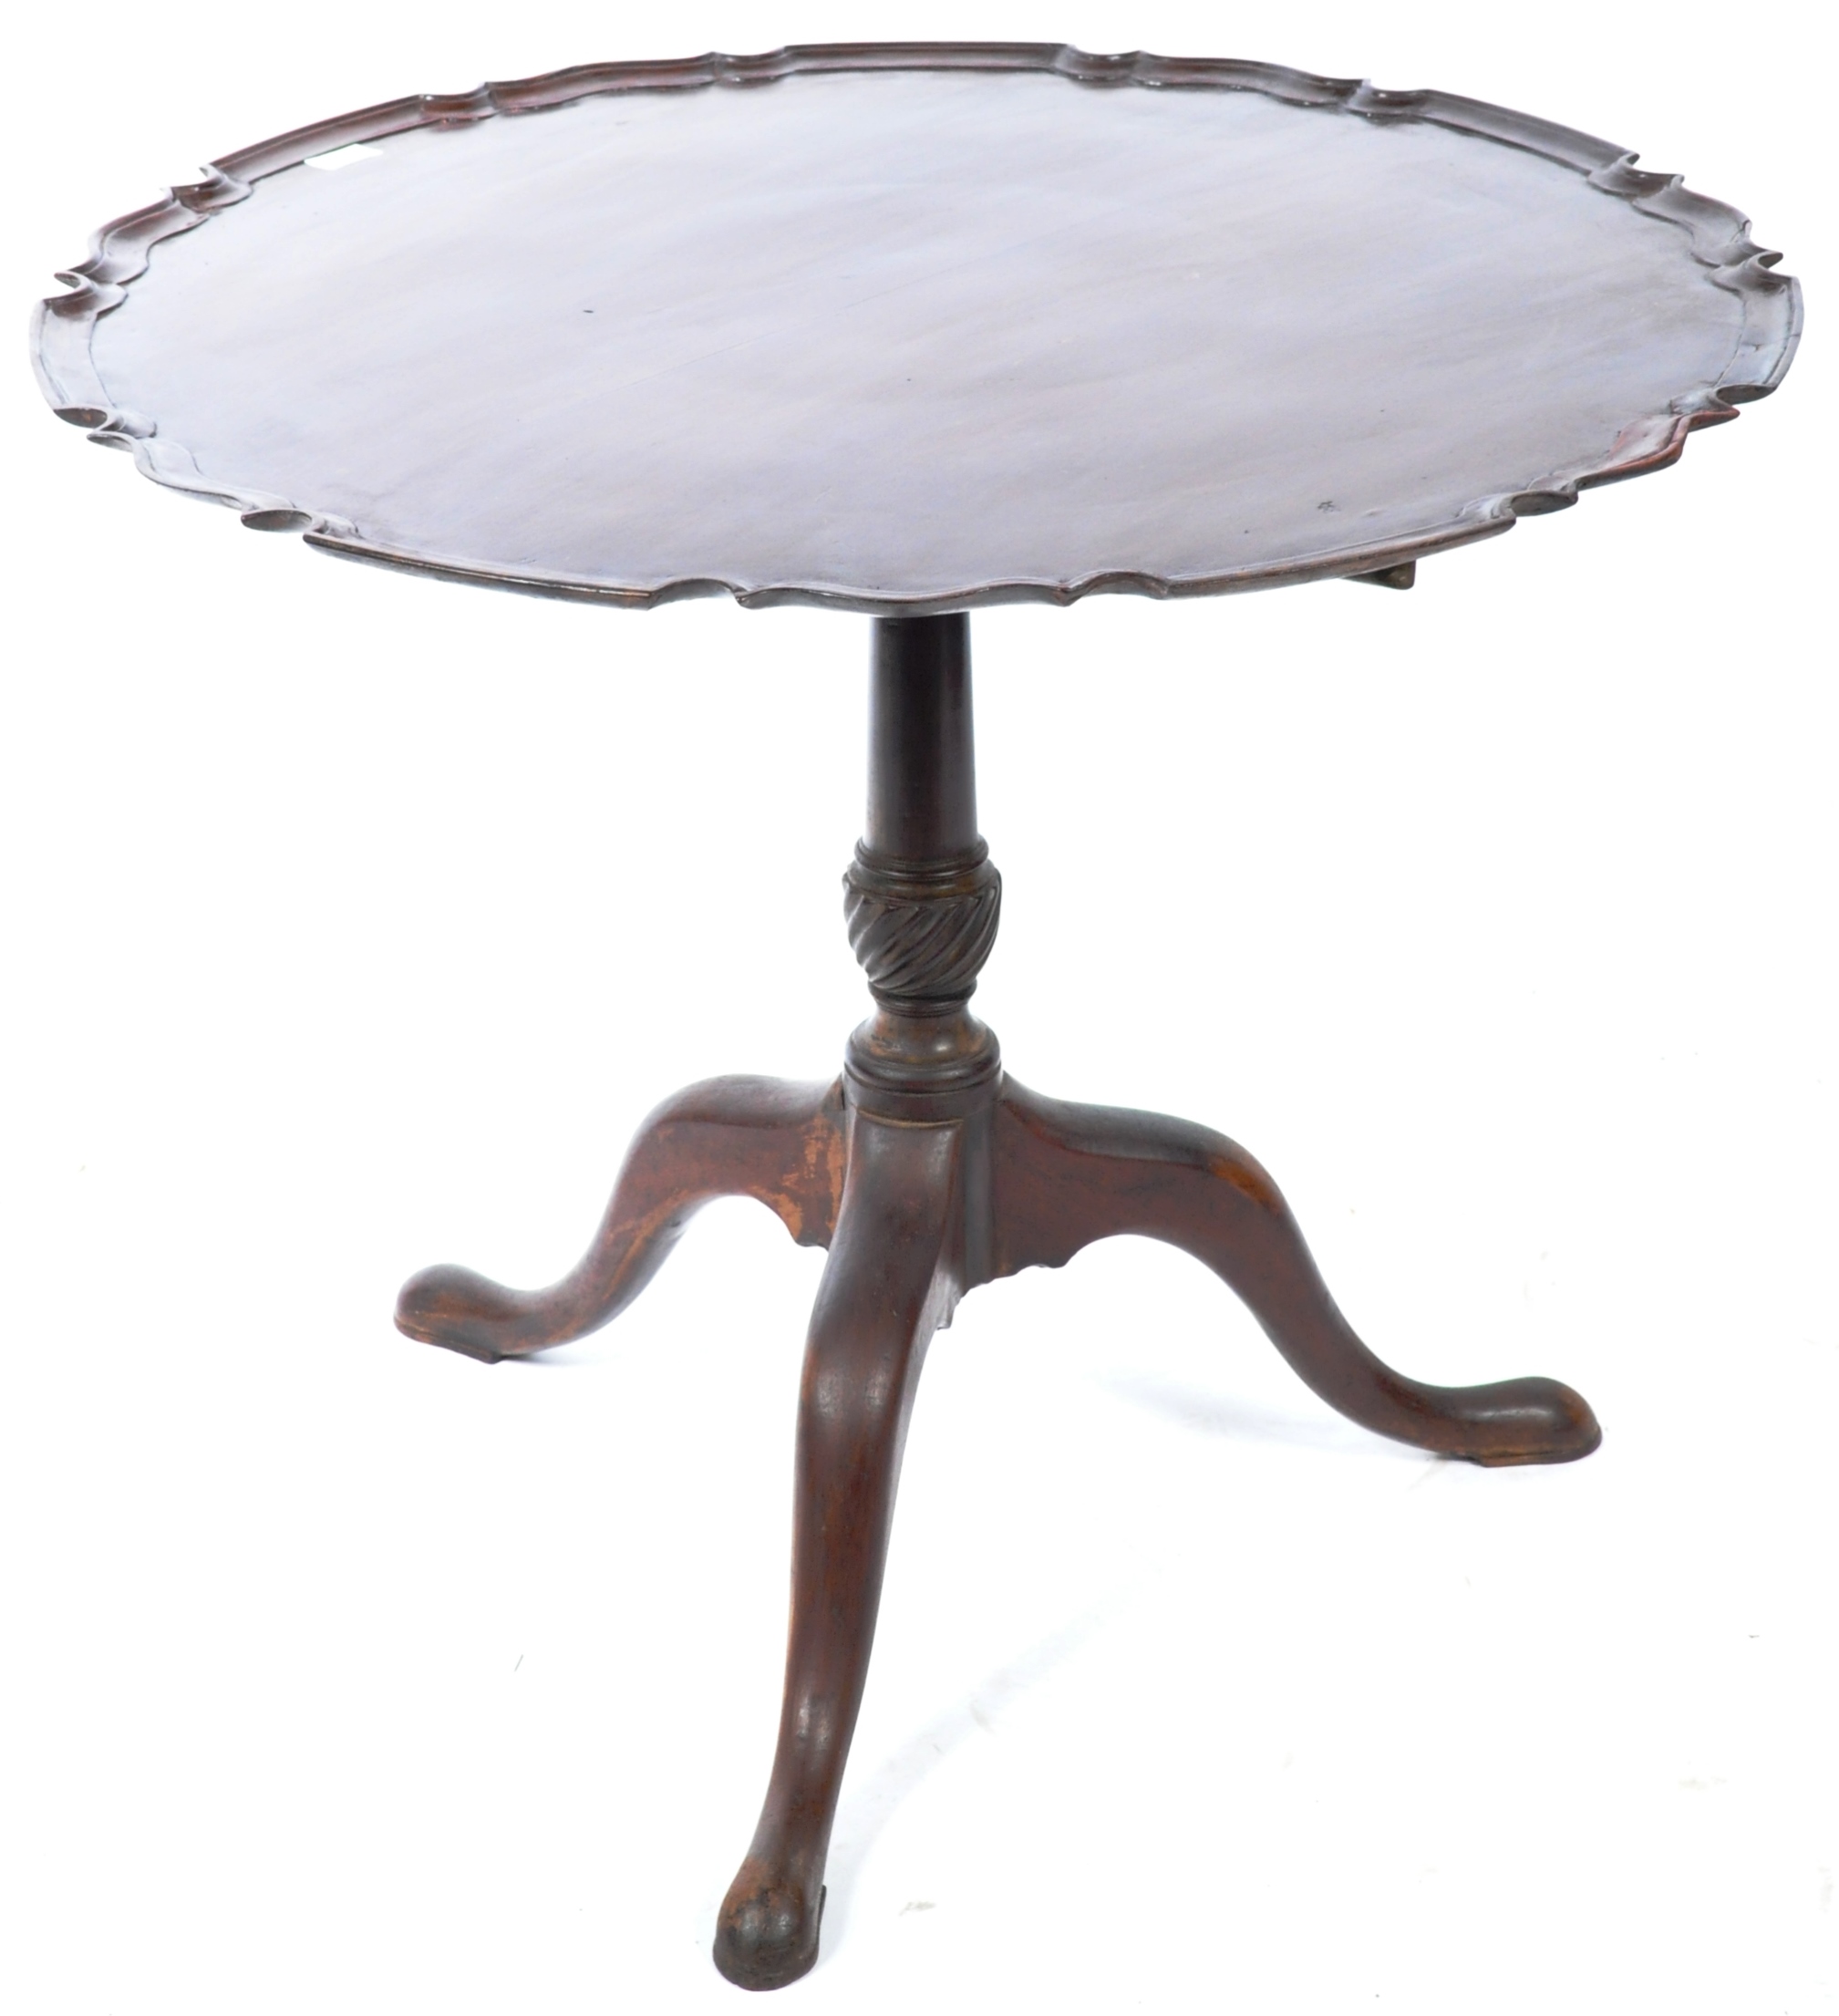 18TH / 19TH CENTURY MAHOAGNY PIE CRUST WINE TABLE / OCCASIONAL TABLE - Image 3 of 6